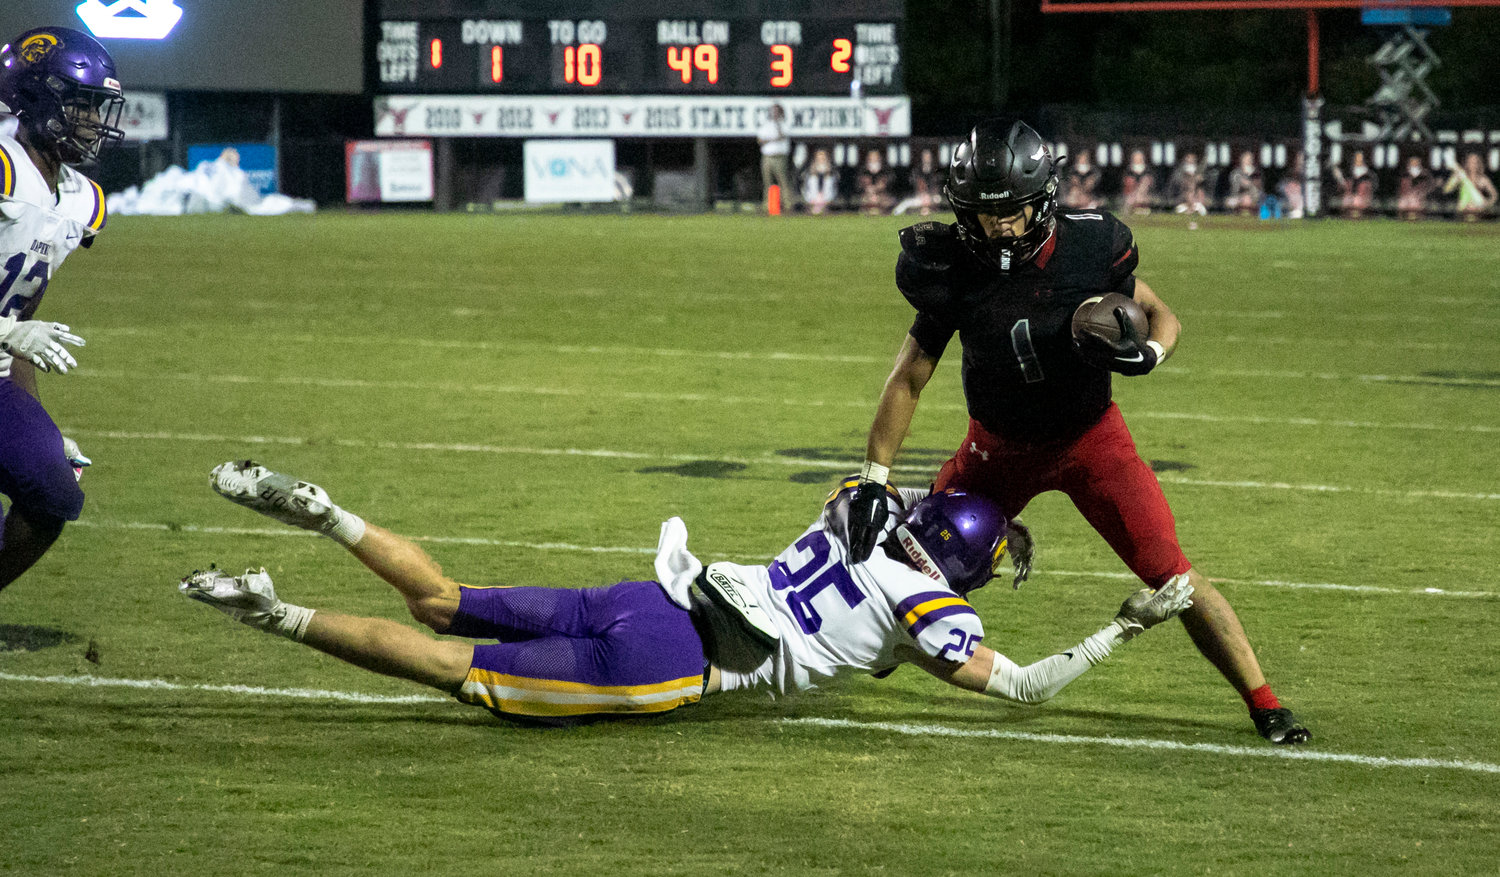 Spanish Fort senior Jacob Godfrey sheds a tackle during the Toros non-region rivalry game against the Daphne Trojans Friday night at Spanish Fort Stadium. Godfrey’s third-quarter touchdown helped the Toros win 18-15.